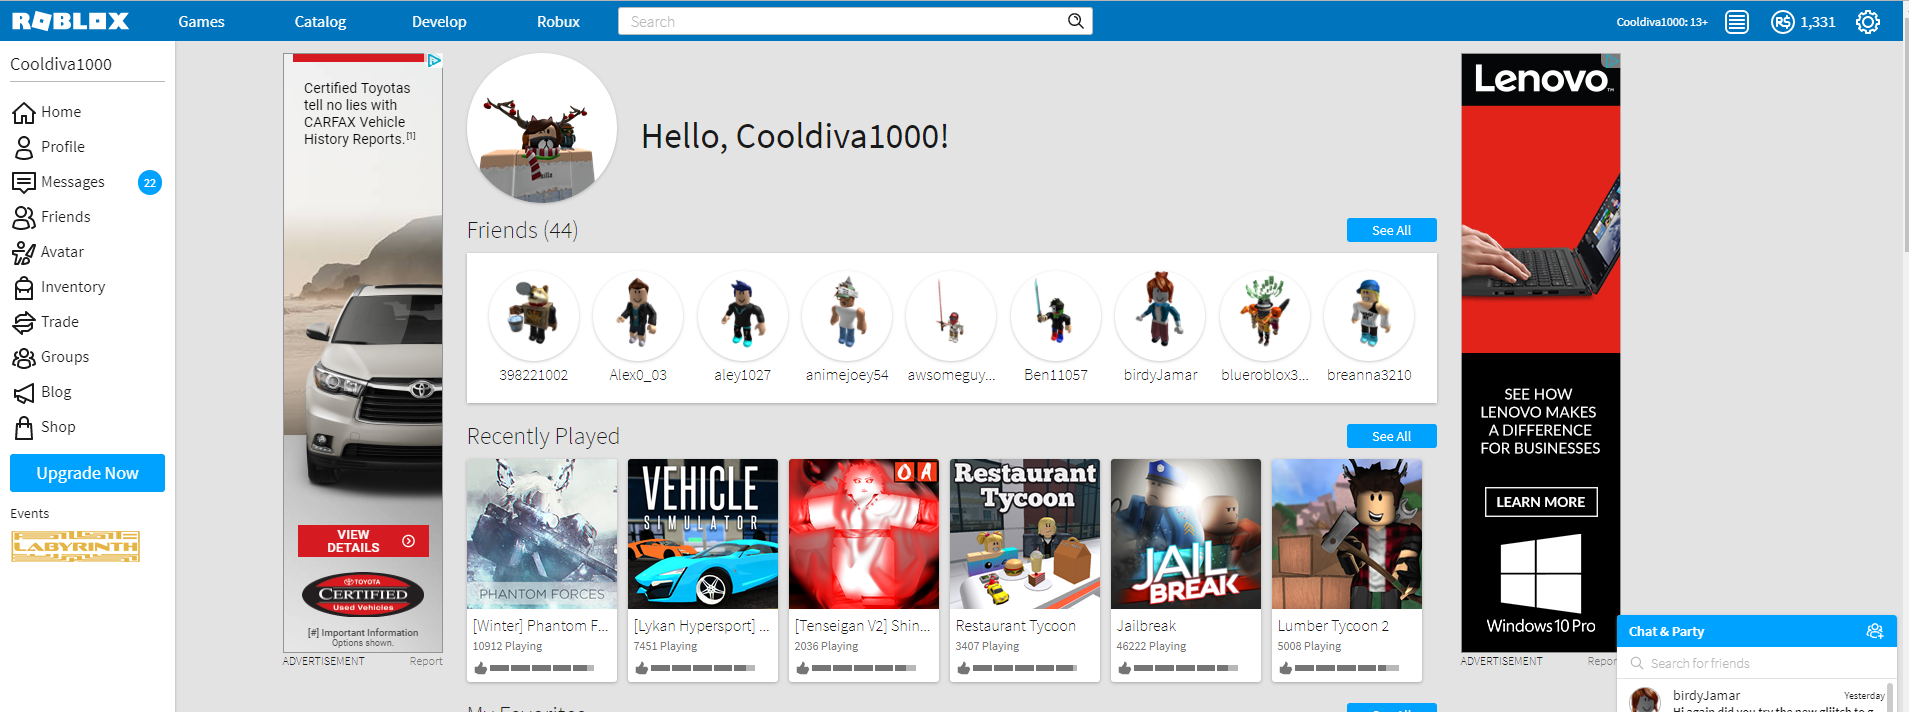 Selling High End 2009 2009 Roblox Female Account Playerup - roblox 2009 account